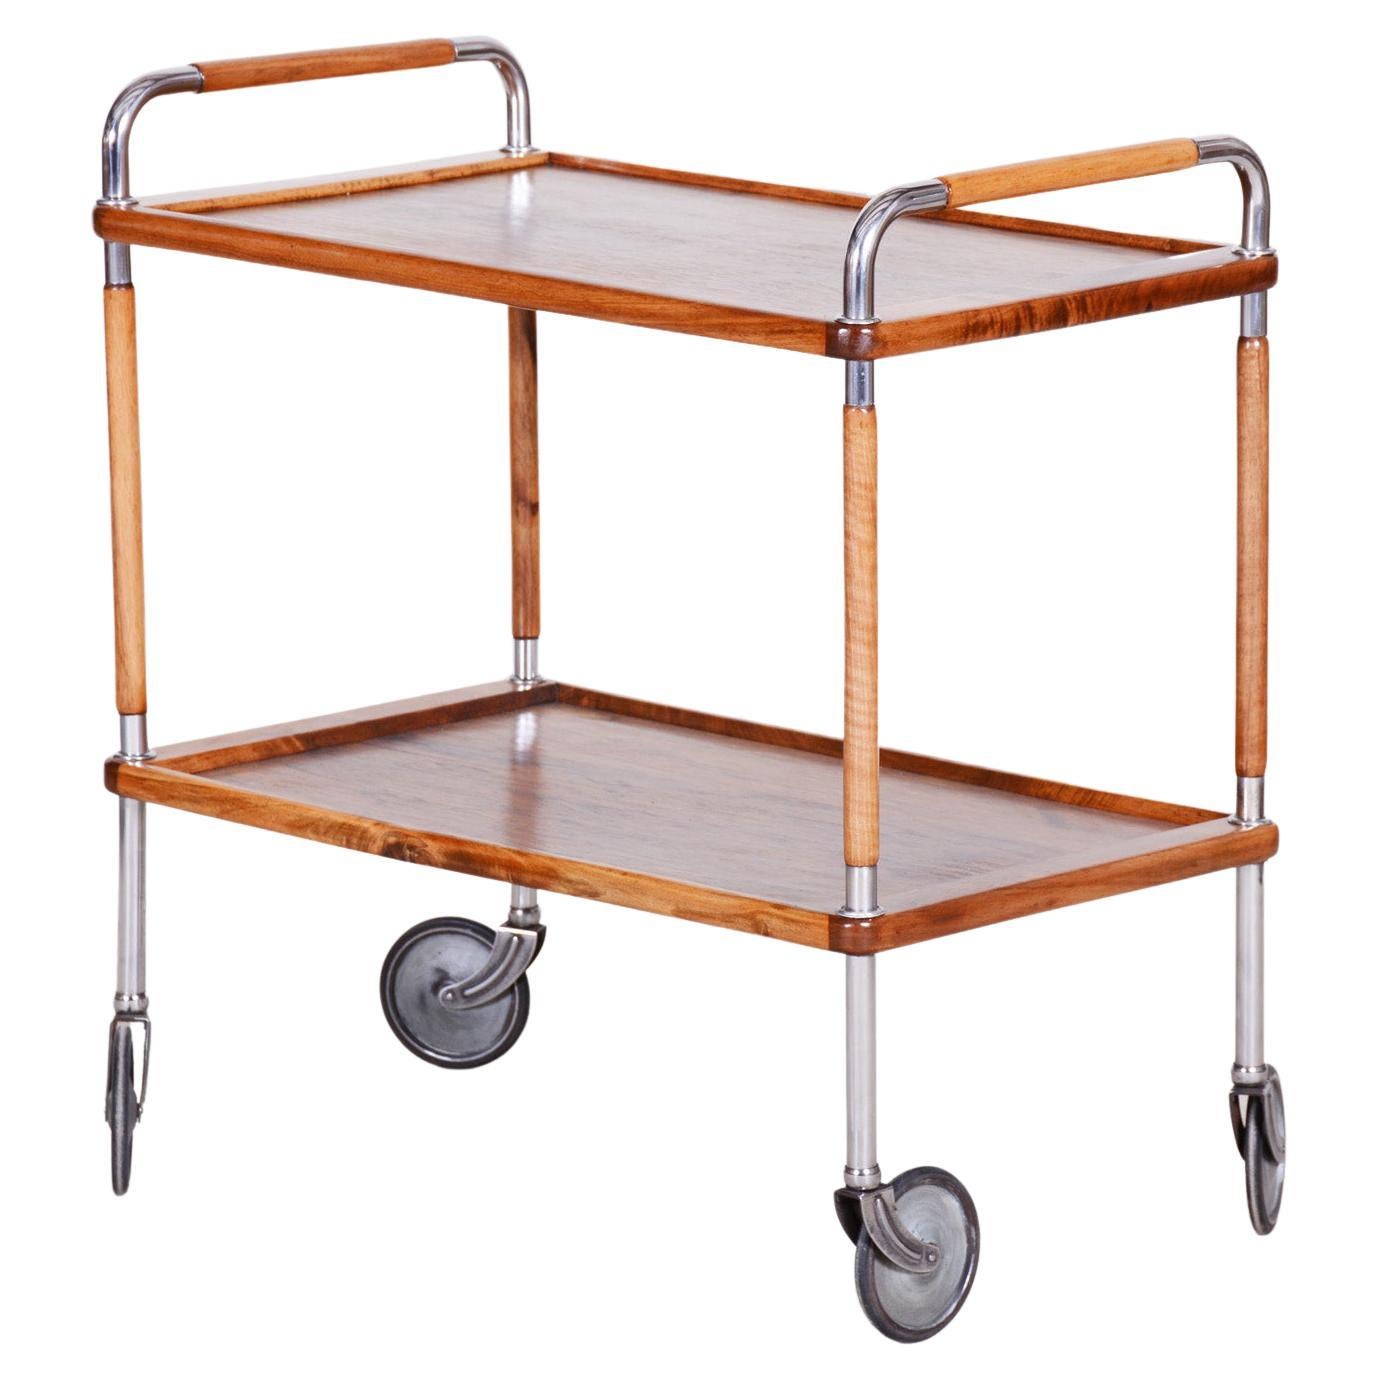 Restored Art Deco Serving Trolley Made in the 1930s by Thonet, Walnut and Steel For Sale